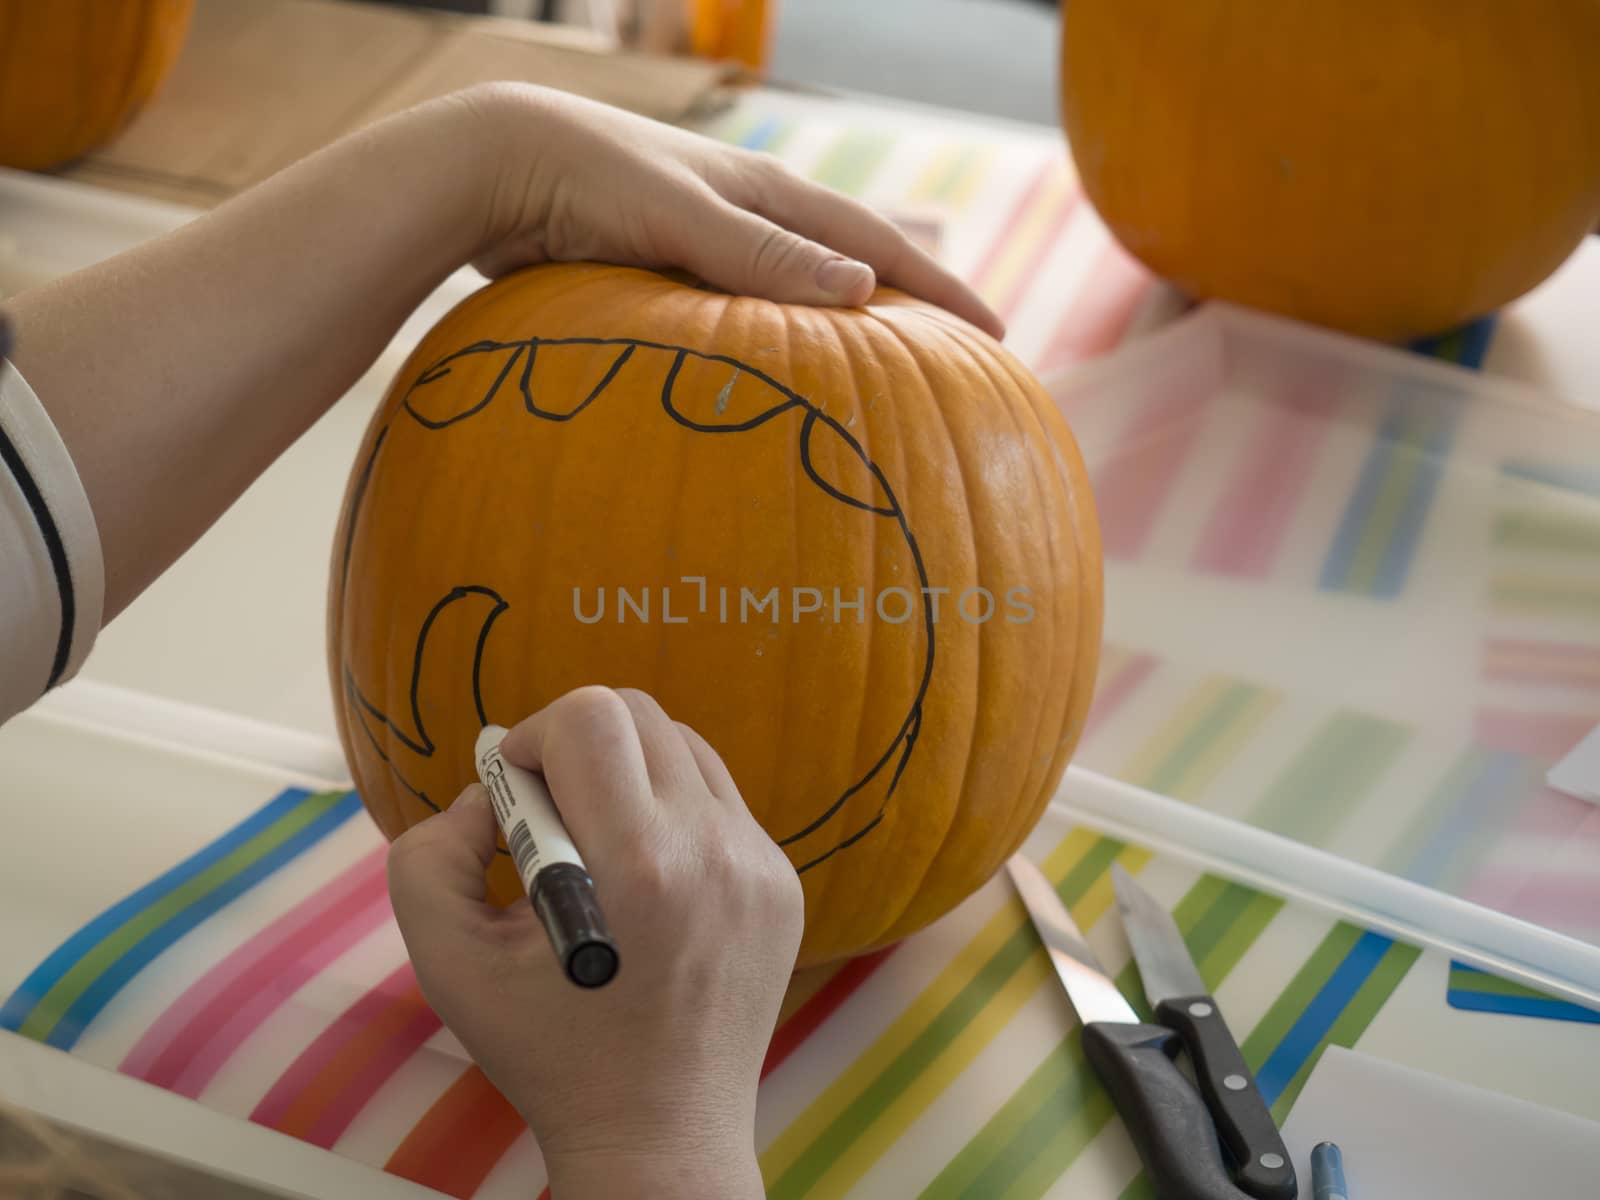 Process of carving pumpkin to make Jack-o-lantern. Creating traditional decoration for Halloween and Thanksgiving. Woman drawing decor on big orange pumpkin.